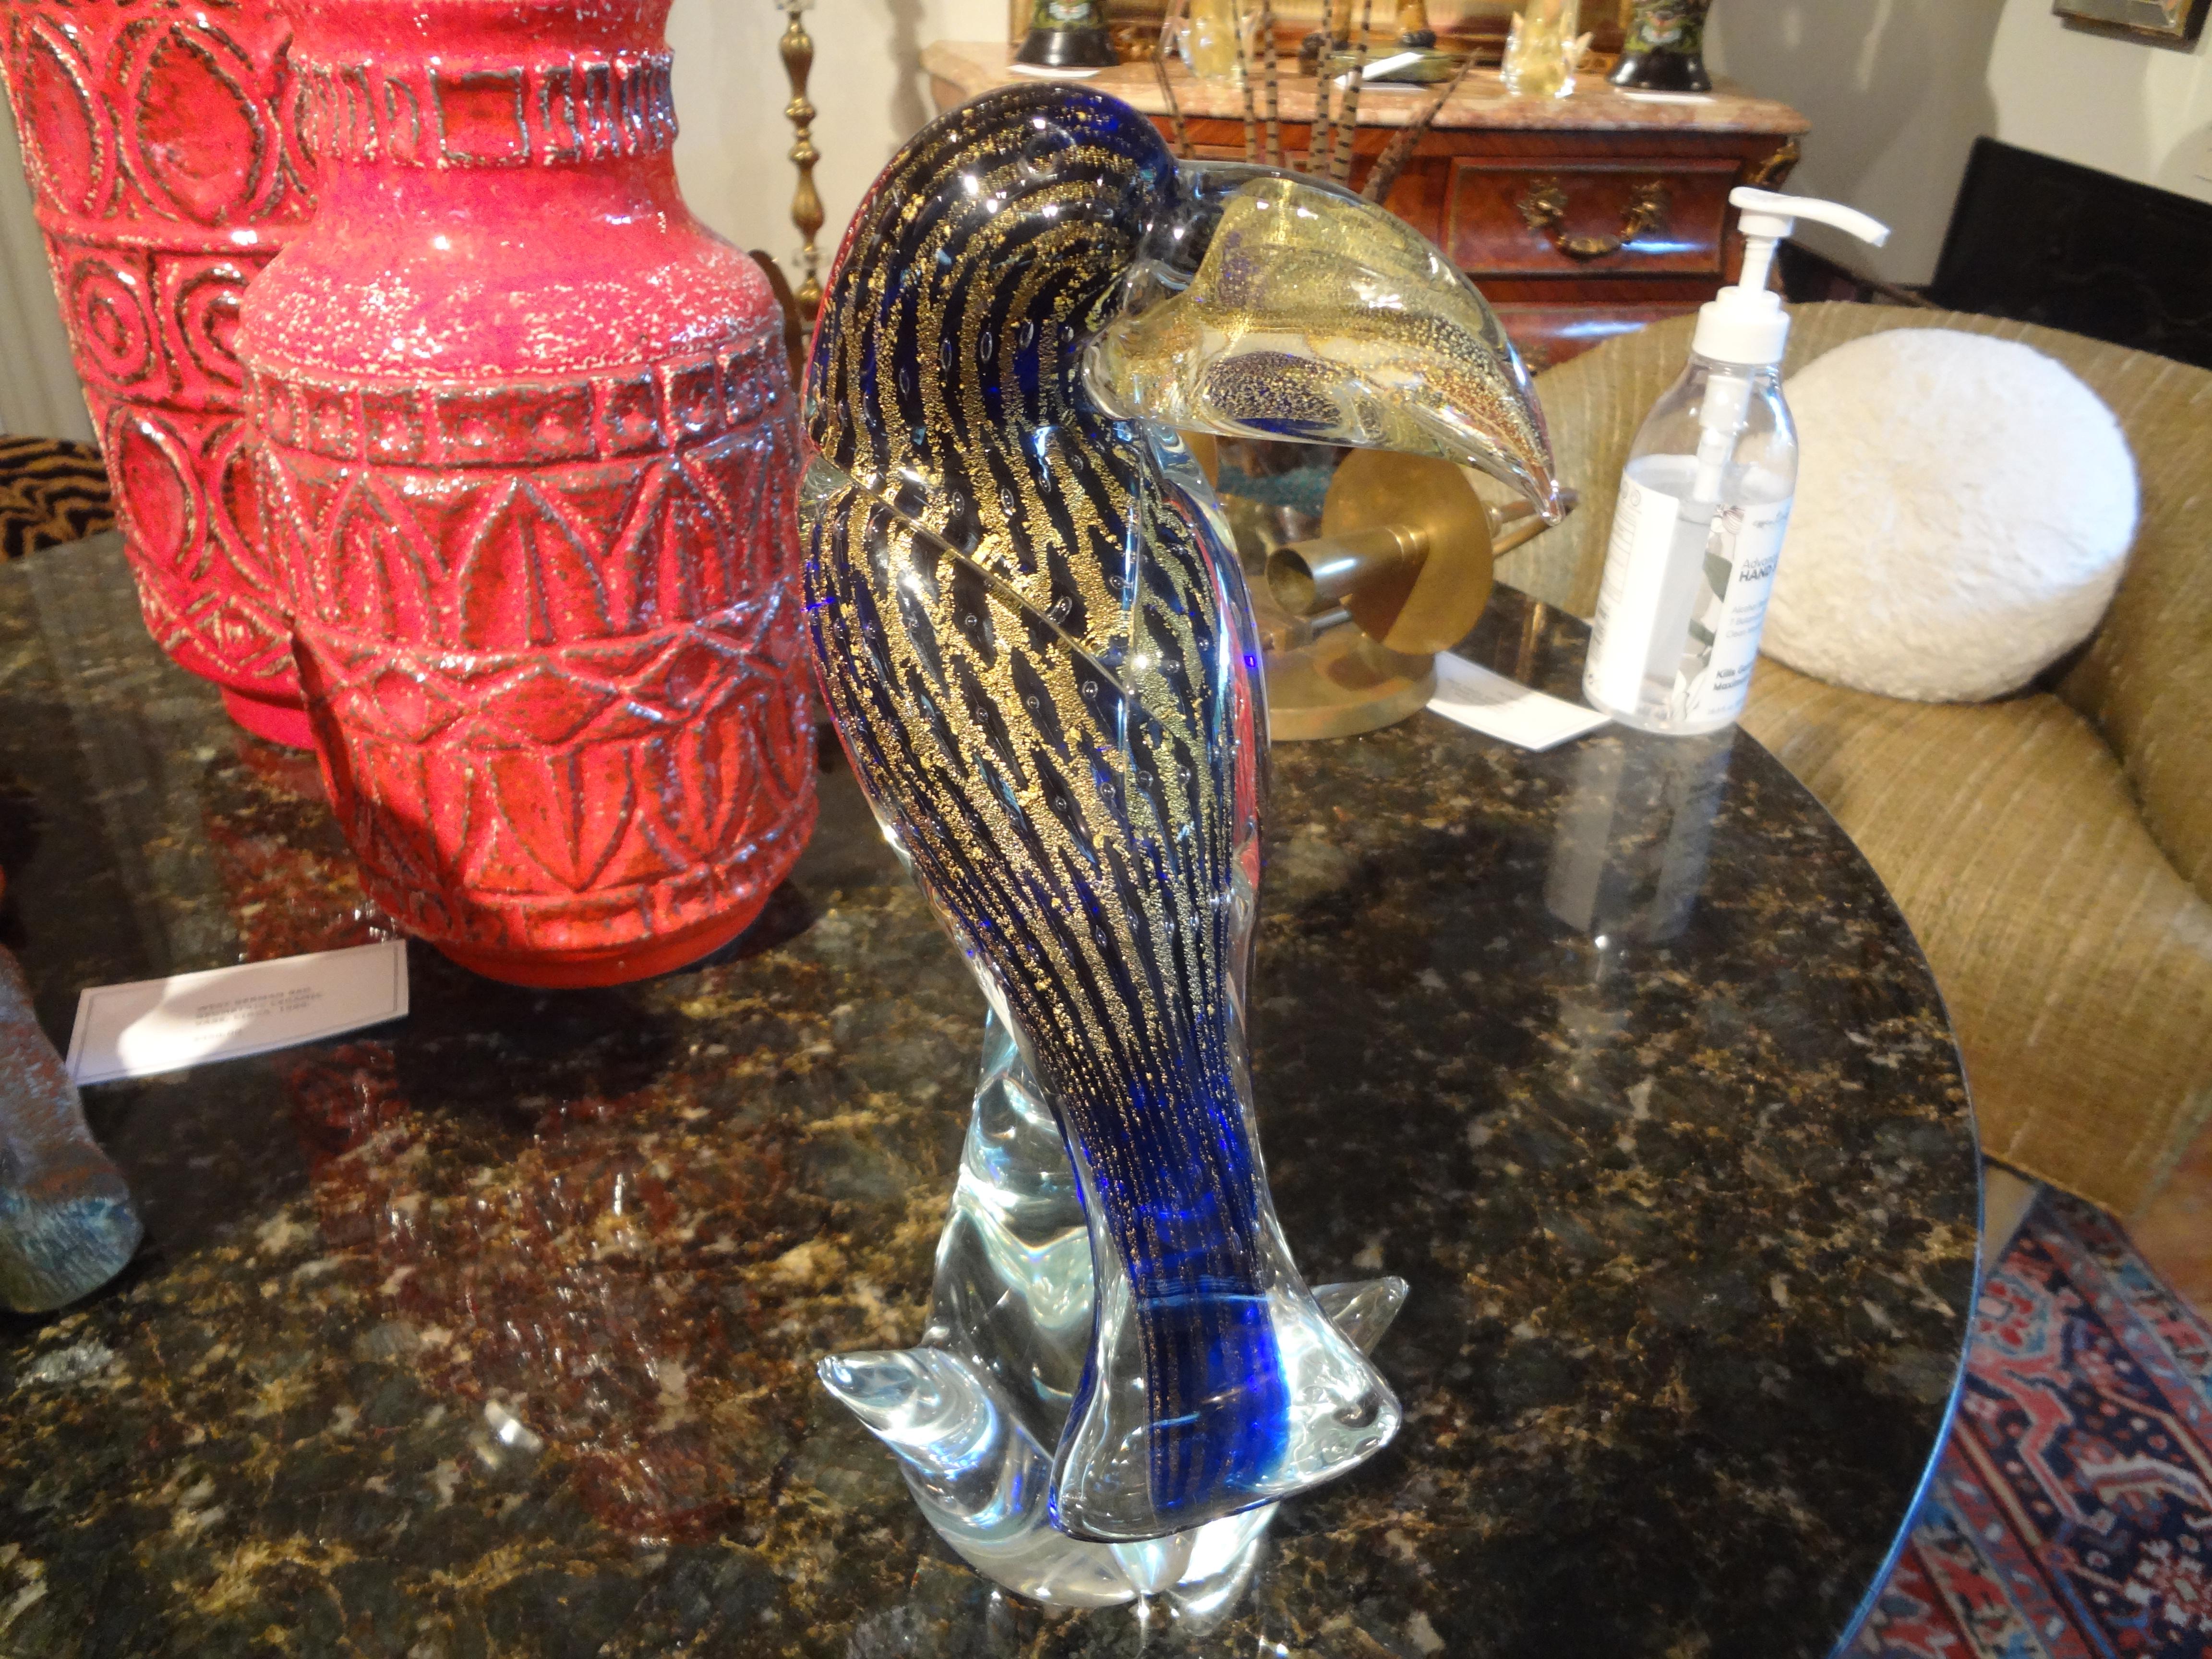 Vintage Murano glass figure of a Toucan.
Gorgeous 20th century hand blown Murano glass figure of a toucan. This beautiful finely detailed Murano toucan bird is executed in a gorgeous cobalt blue filled with gold. Unsigned but clearly by a master